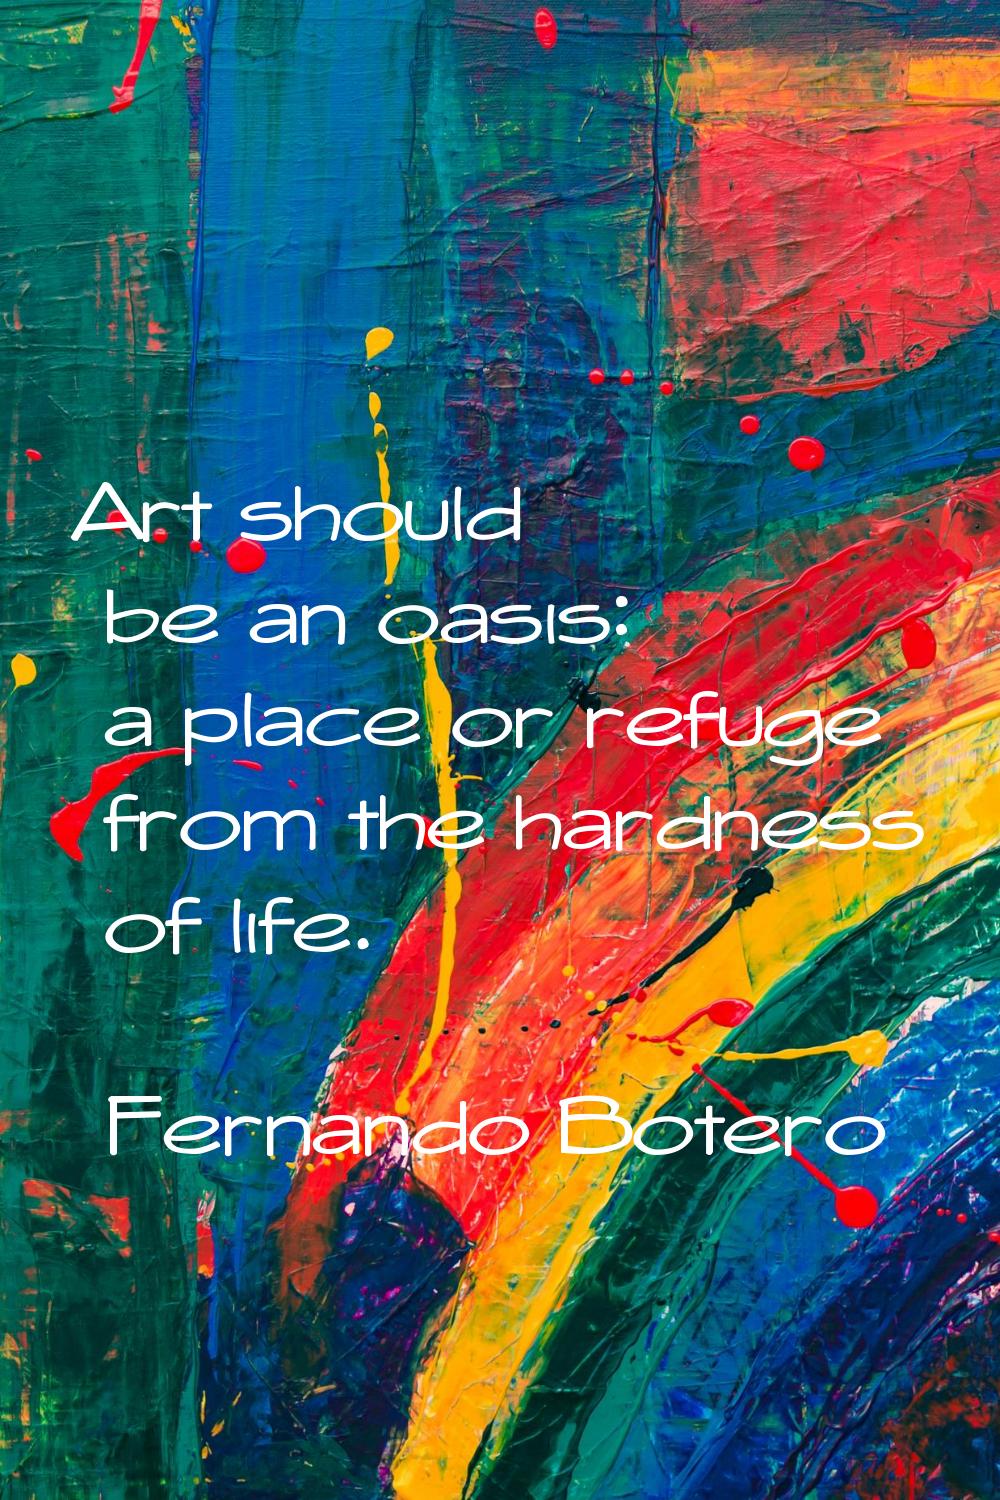 Art should be an oasis: a place or refuge from the hardness of life.